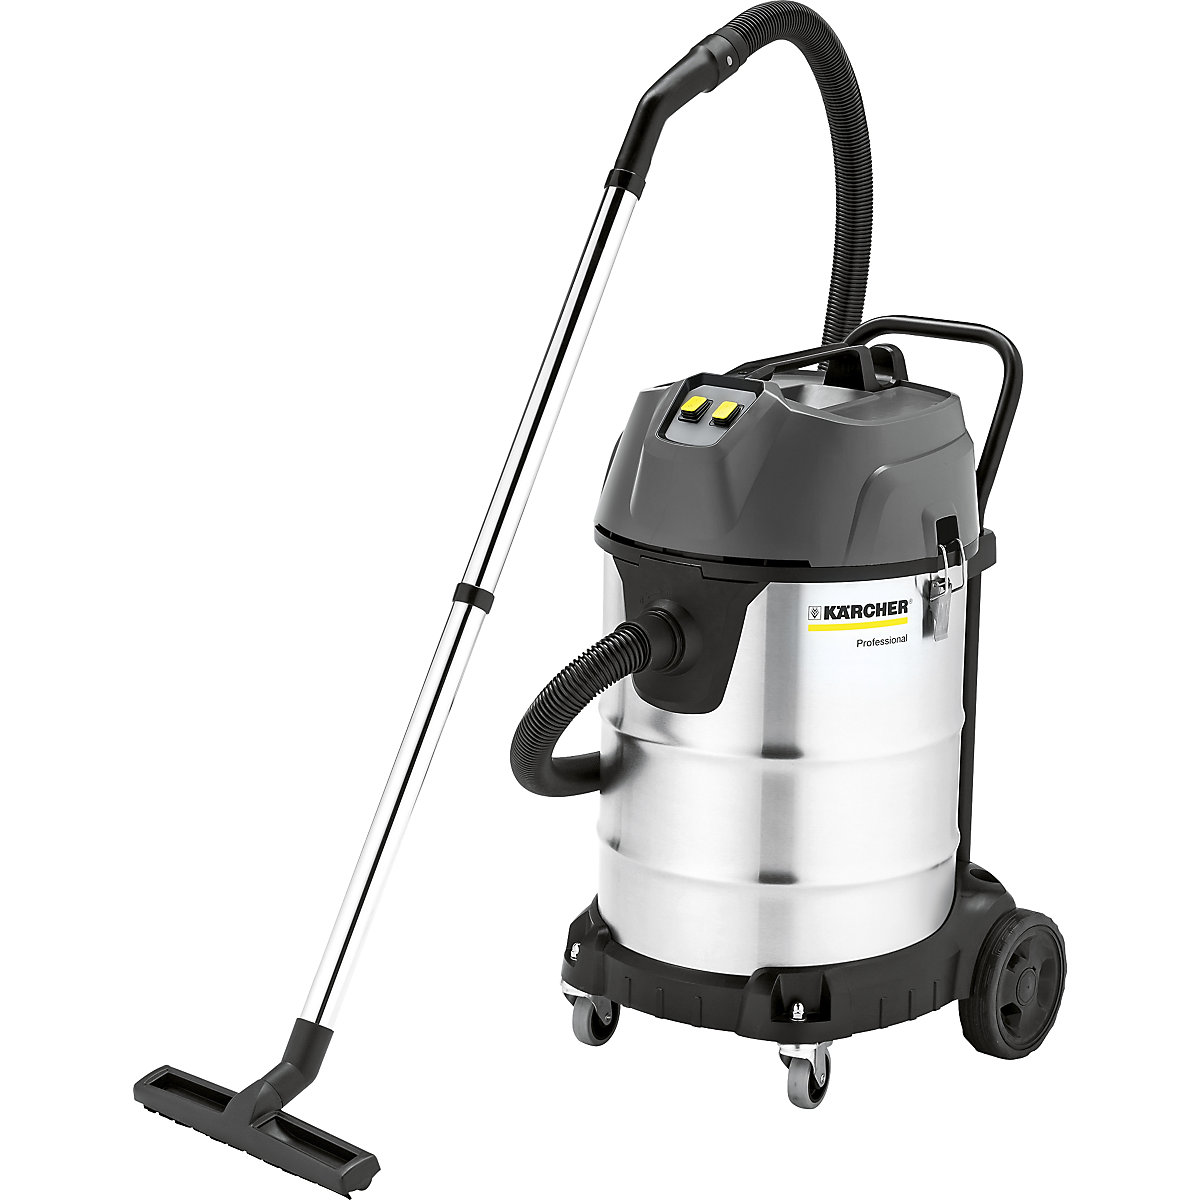 NT 70/2 Me Classic wet and dry vacuum cleaner – Kärcher